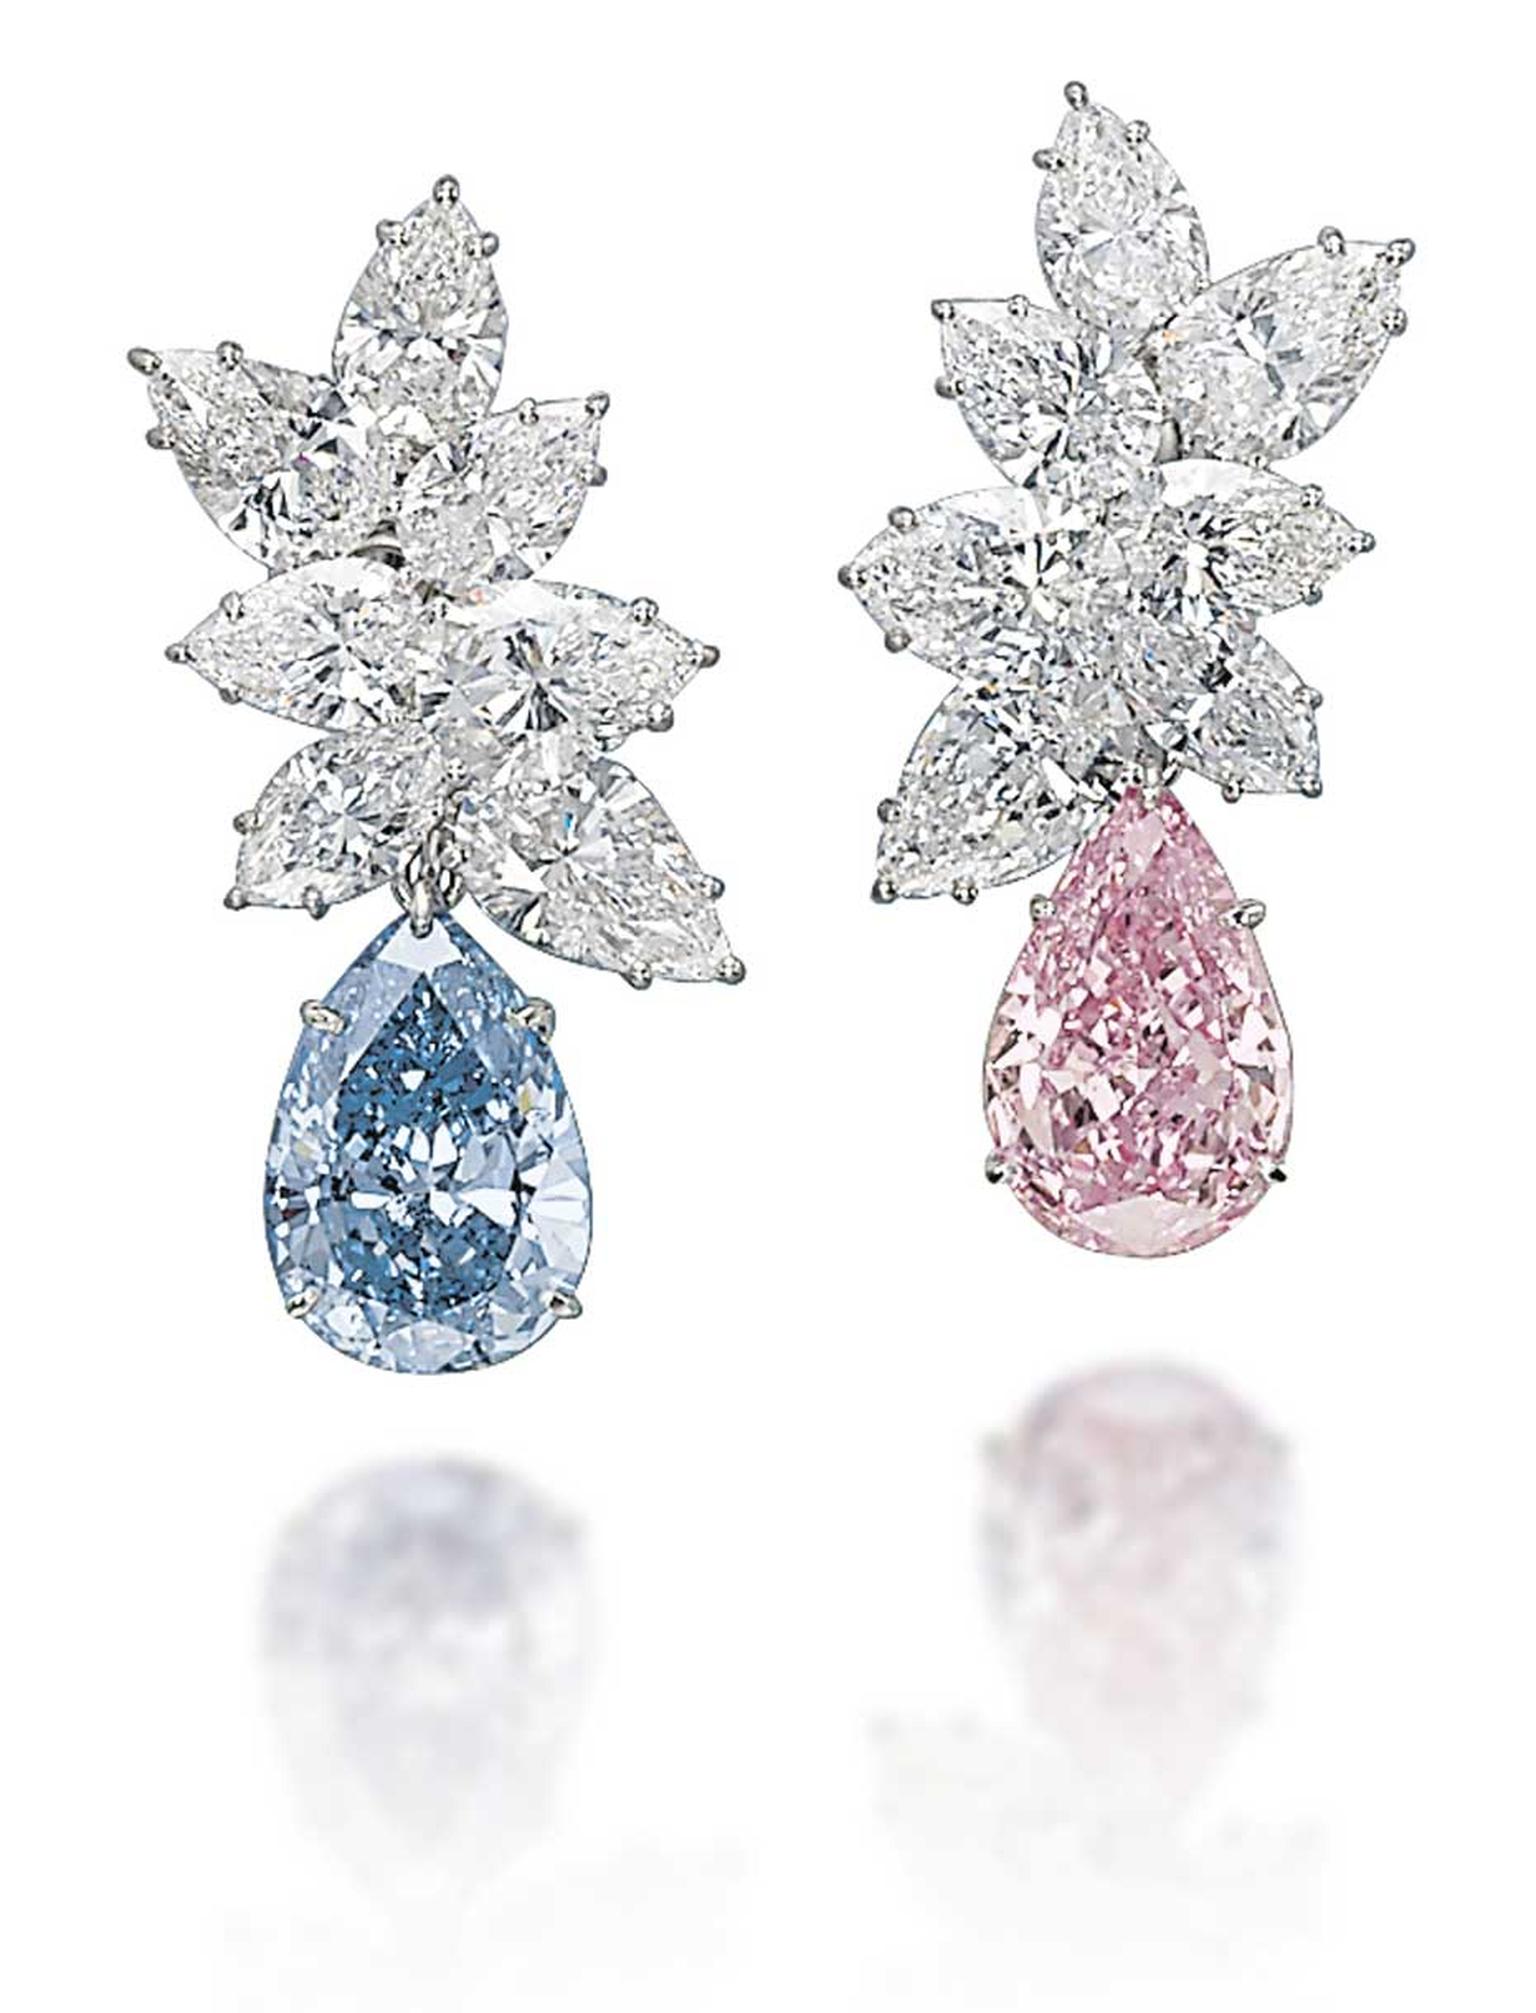 A pair of coloured diamond ear pendants, set with pear-shaped diamonds in Fancy blue and Vivid pink, achieved the second highest price at Christie's Magnificent Jewels Sale in Geneva, selling to Laurence Graff for $15.82 million.